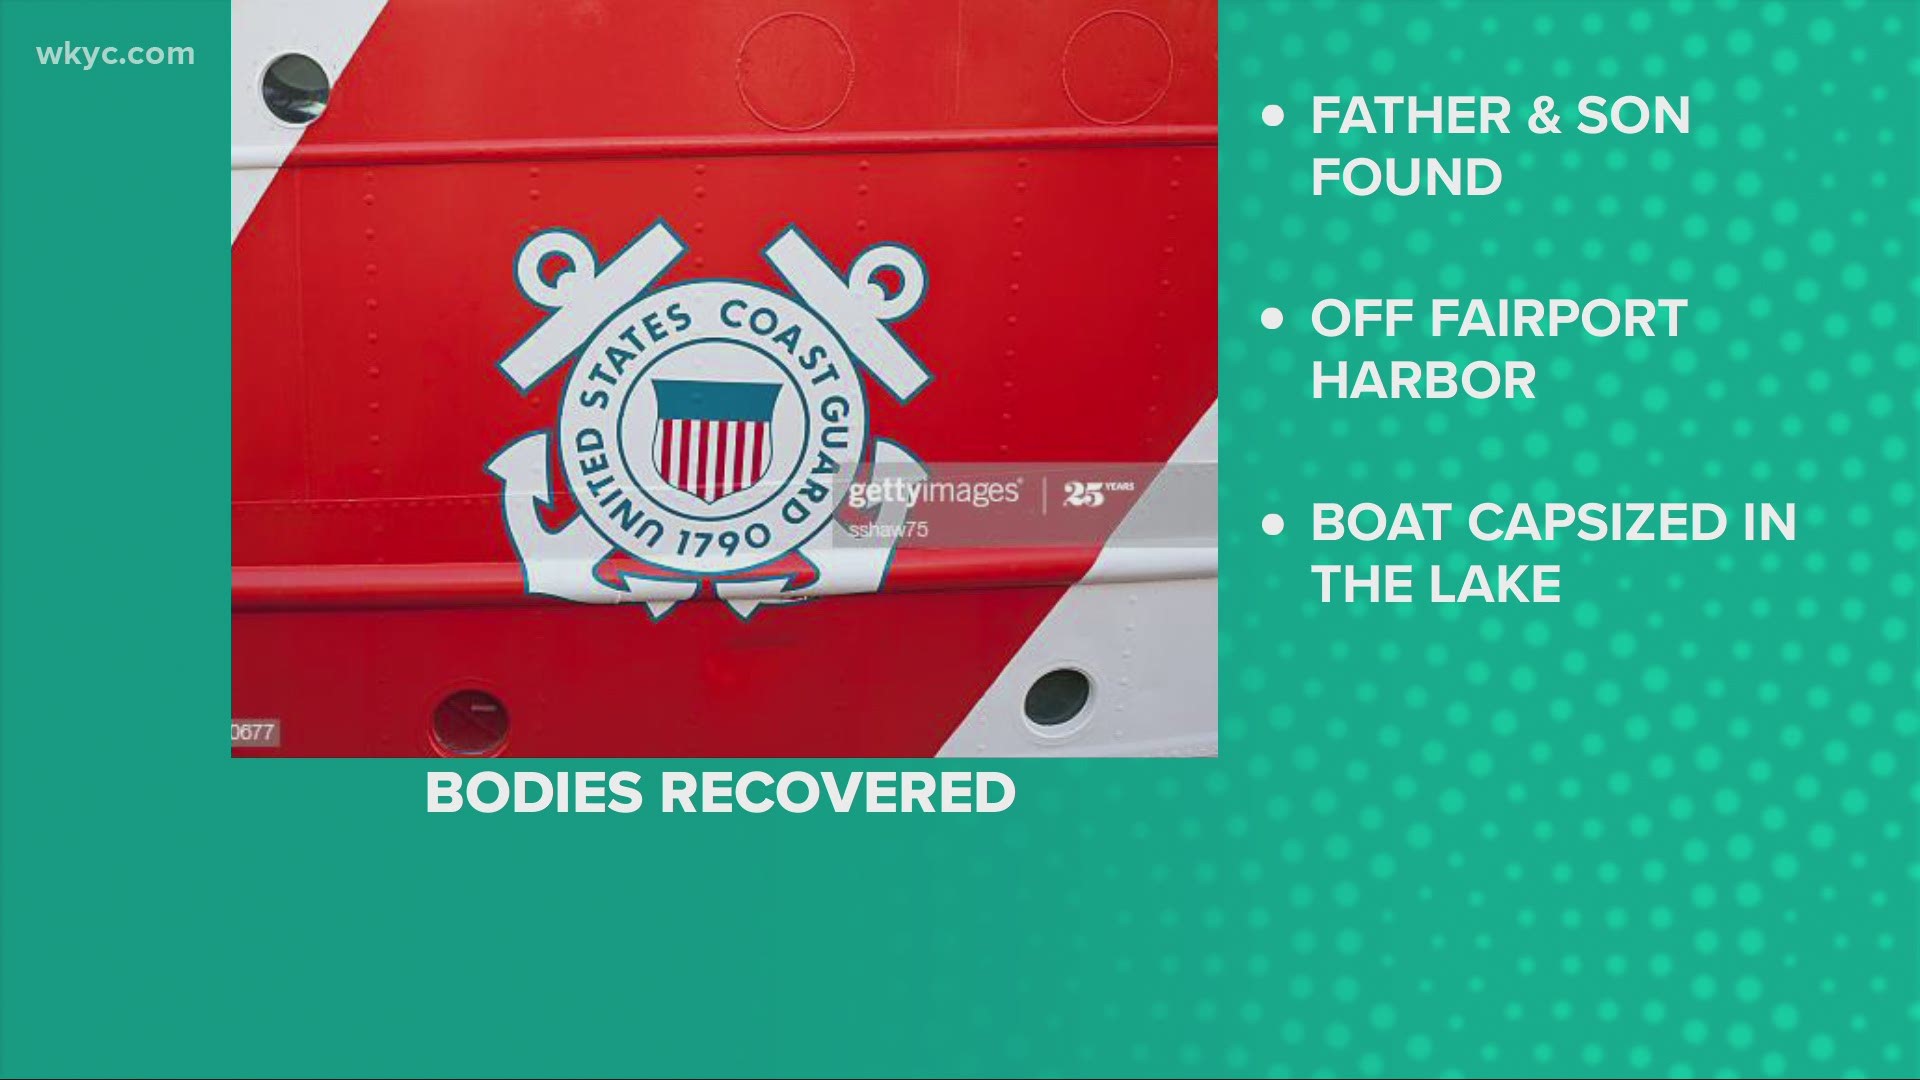 A father and son went missing after going boating in the waters of Lake Erie off Fairport Harbor days ago. They both have been found dead.